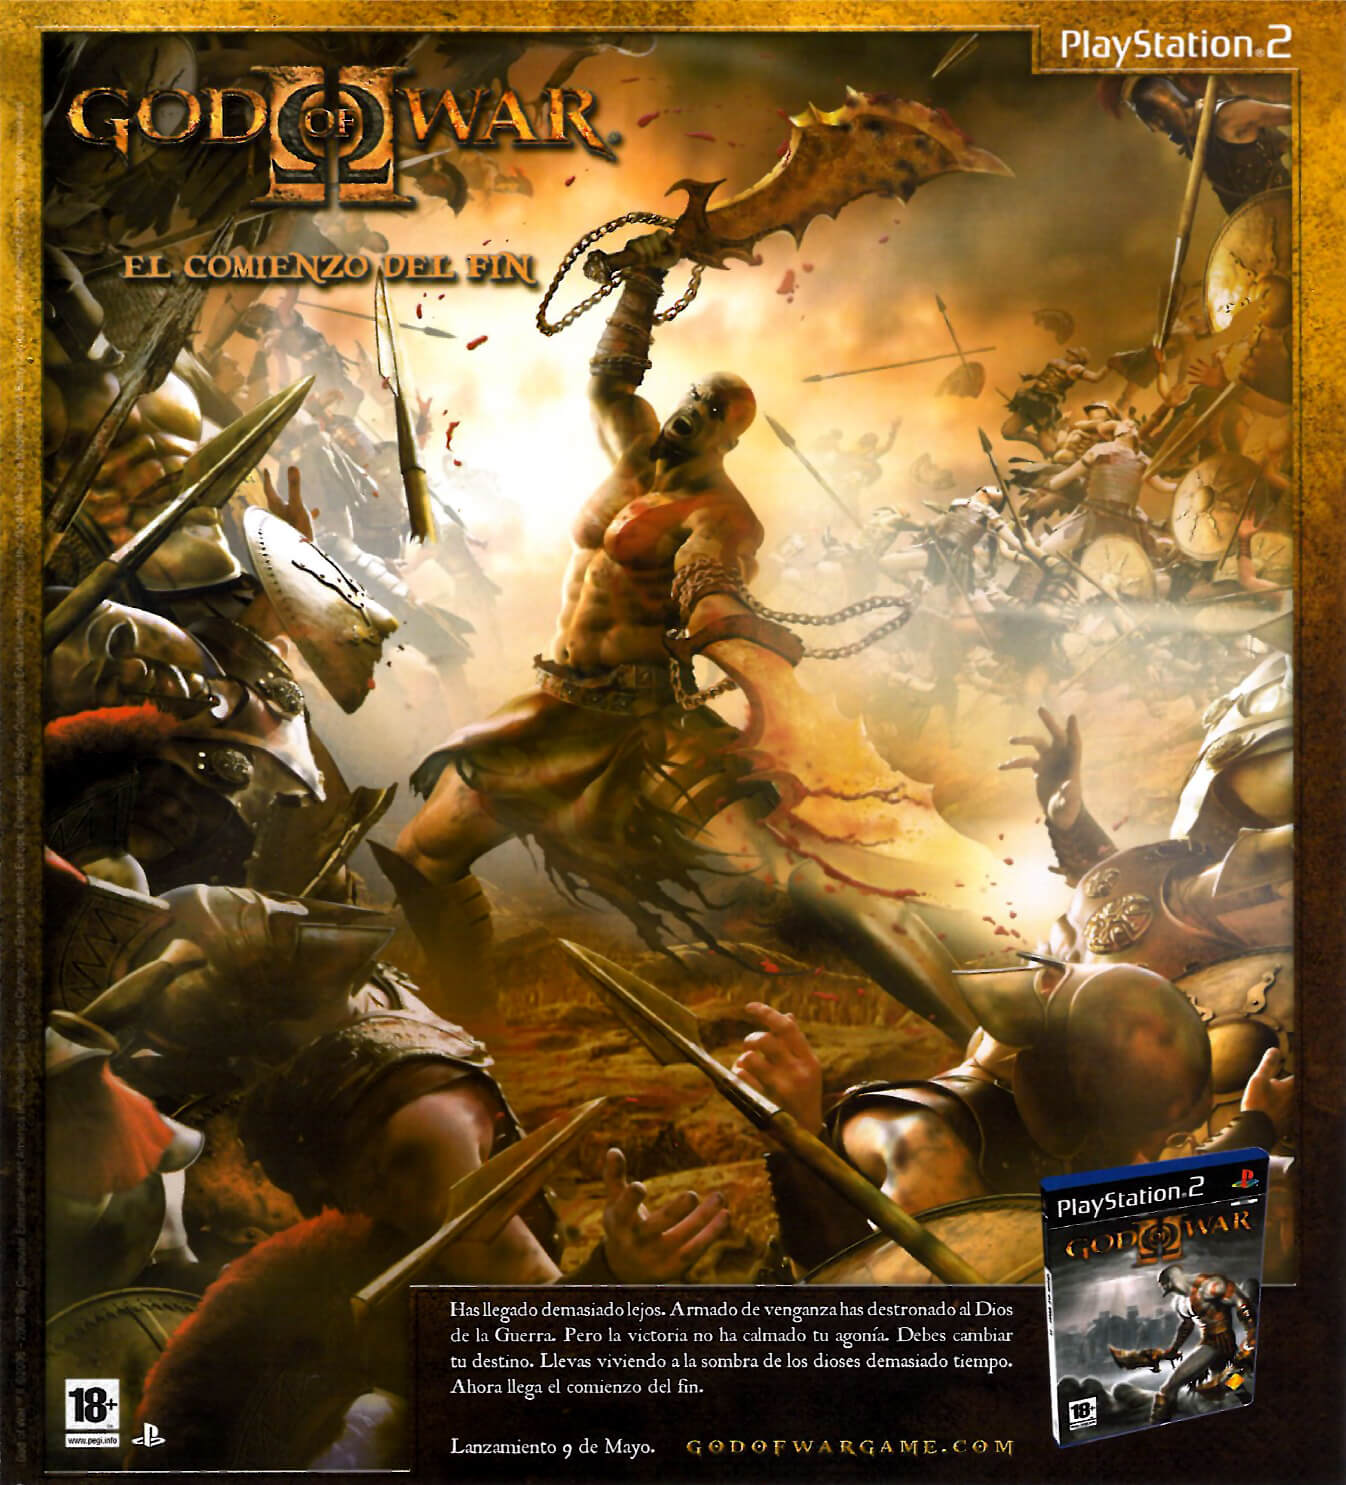 God of War (Demo) ROM (ISO) Download for Sony Playstation 2 / PS2